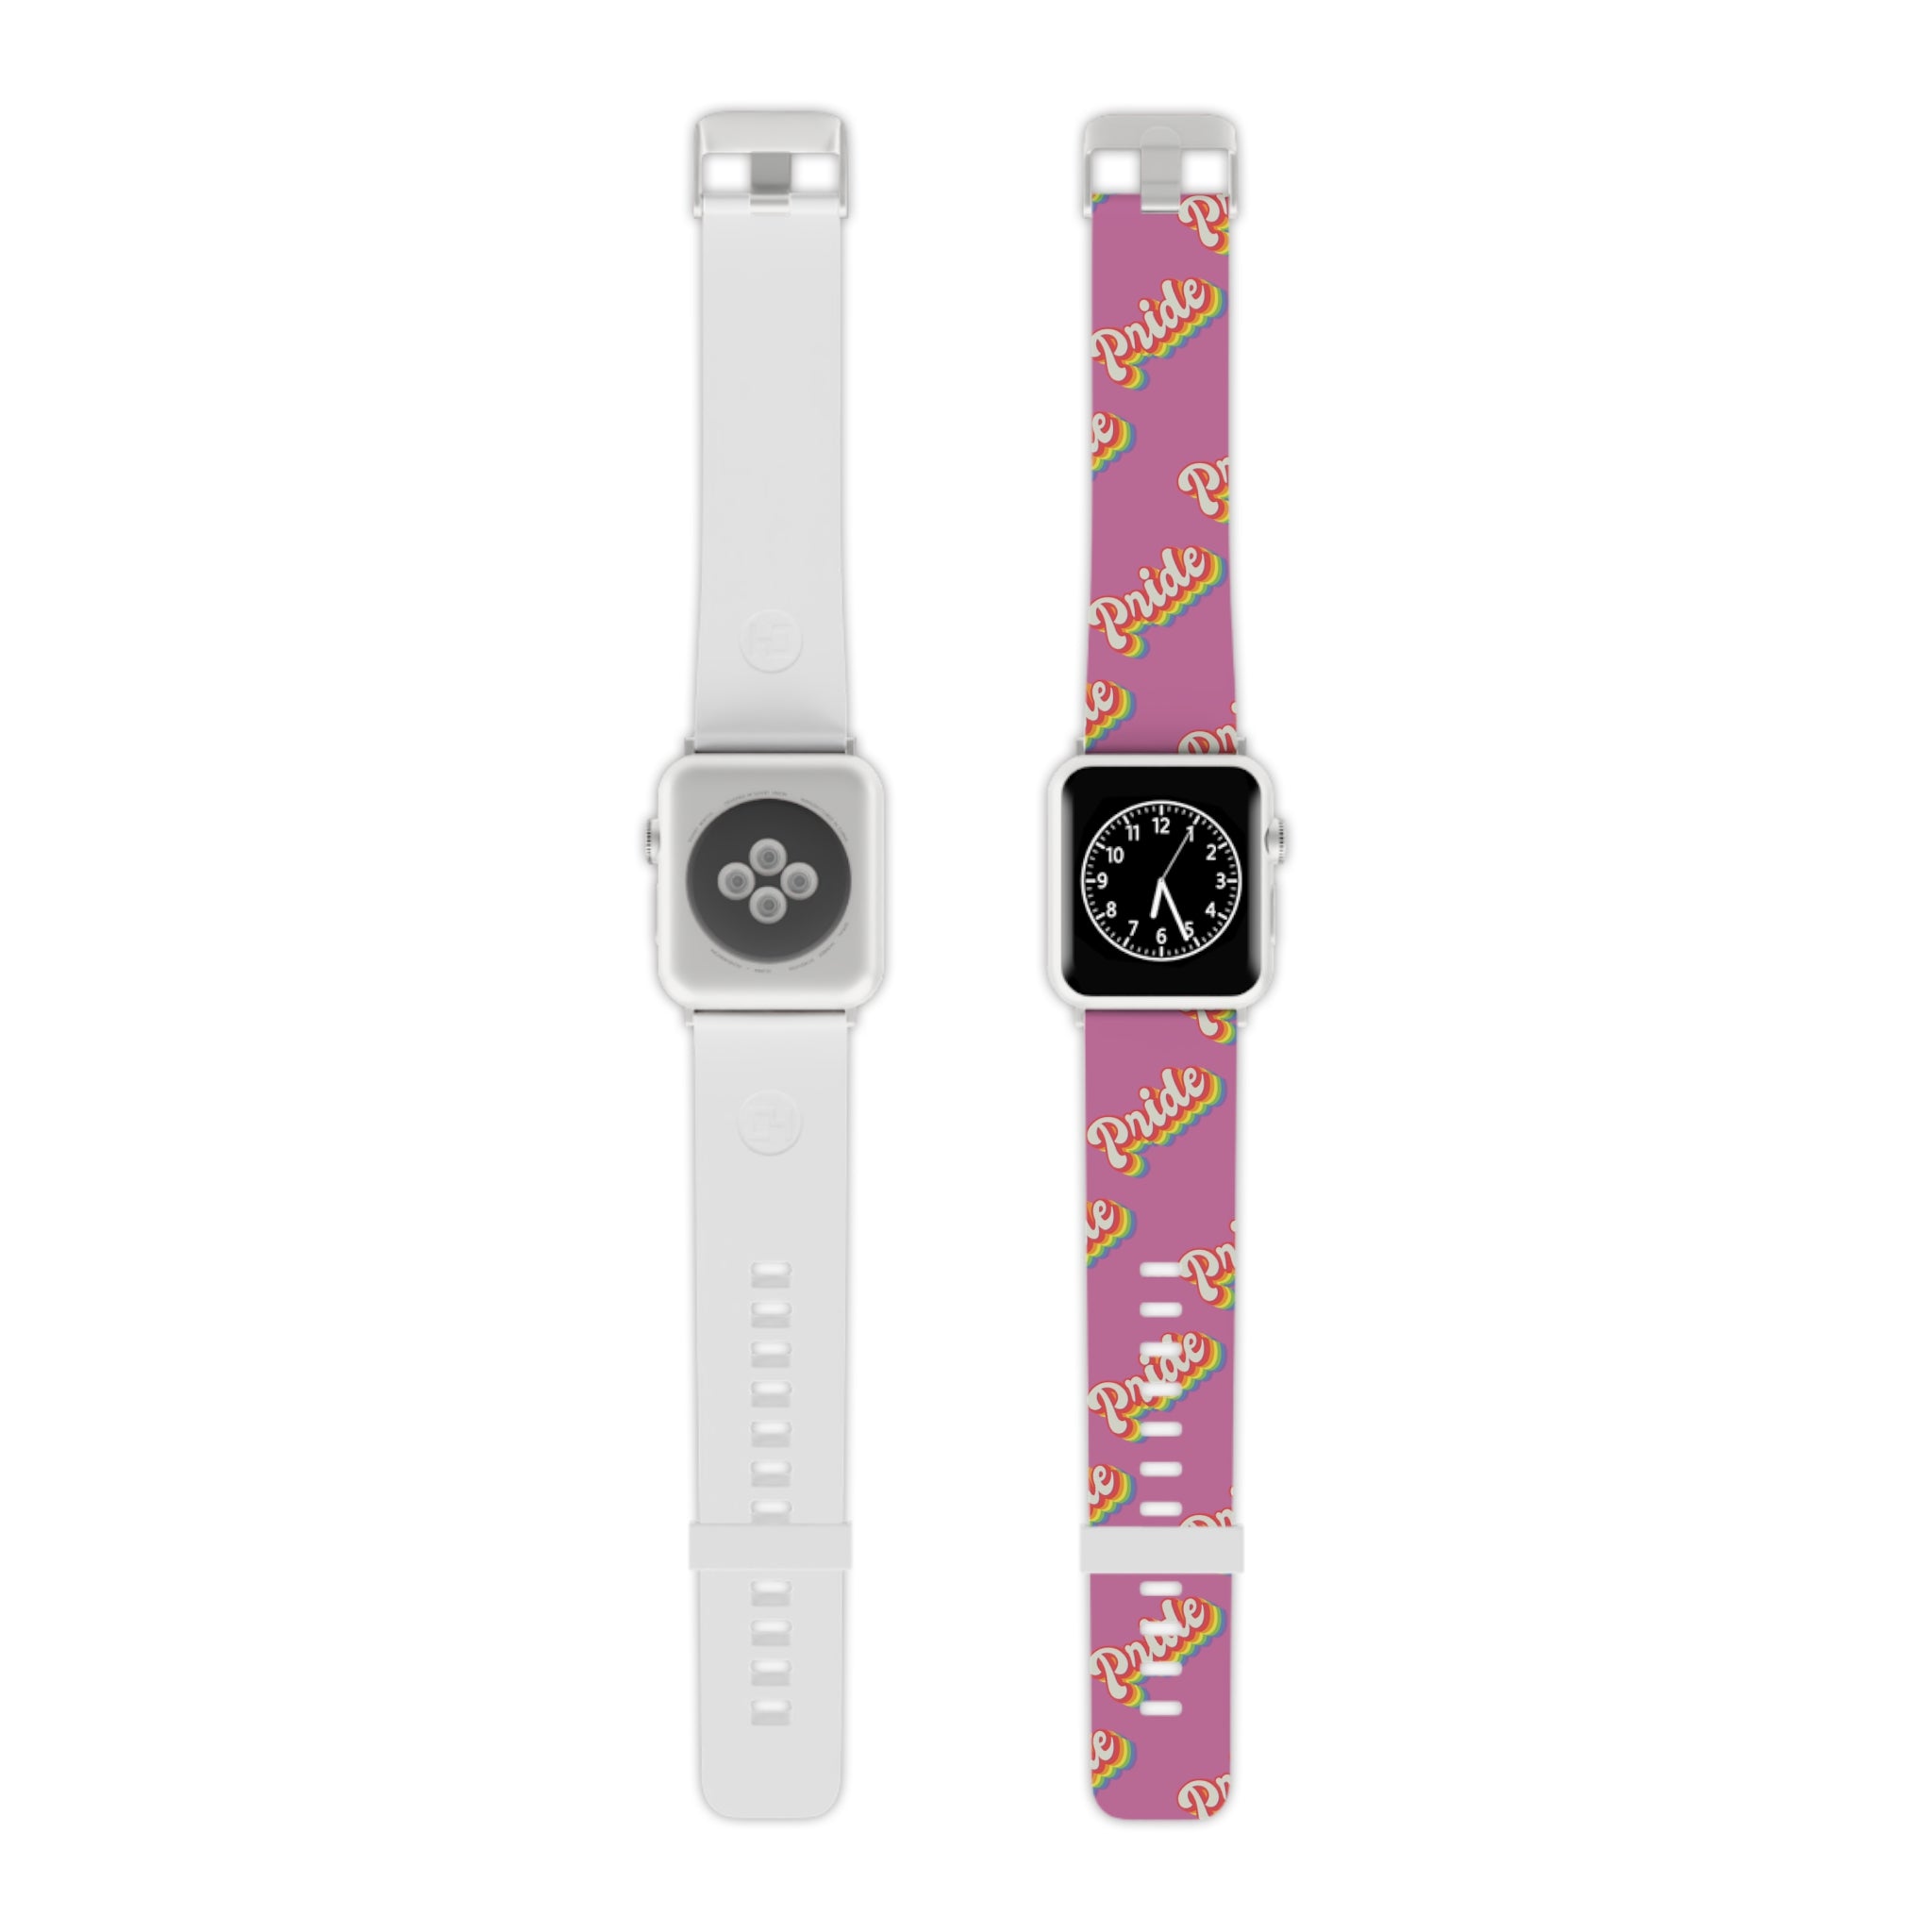 A fashionable alternative Pride Band for Apple Watch T-Shirt with a custom-printed pink and white design.